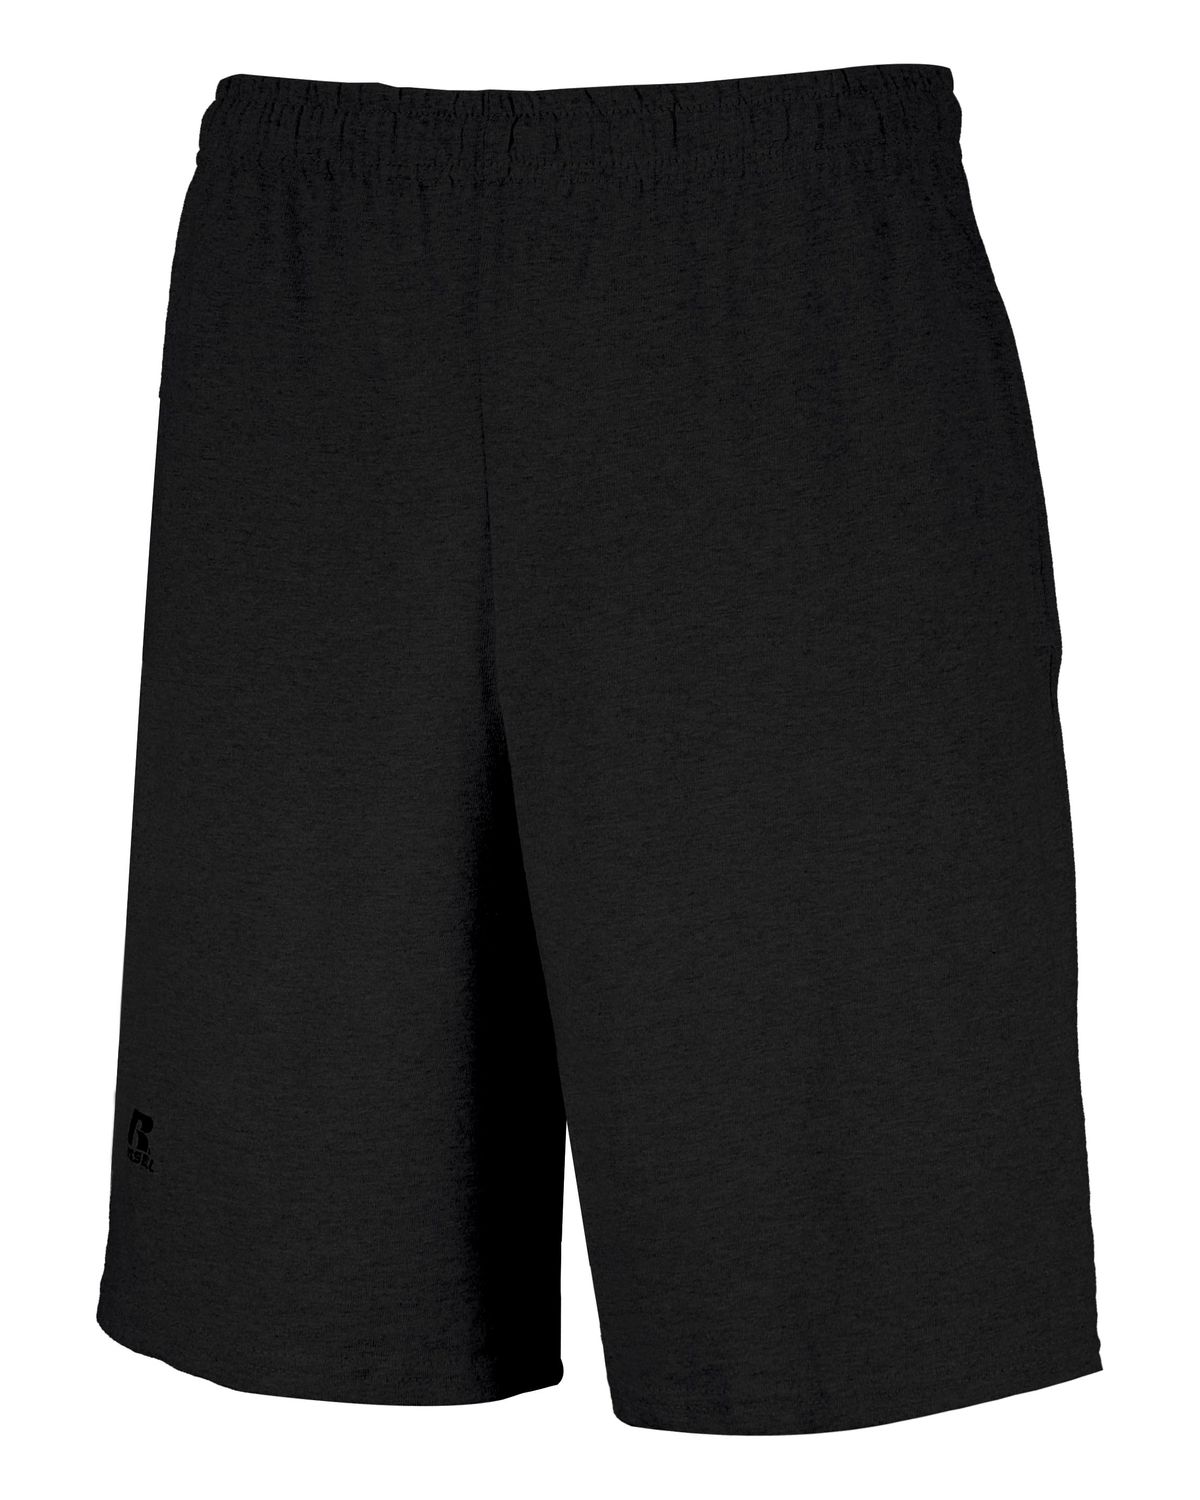 'Russell Athletic 25843M Essential jersey cotton shorts with pockets'